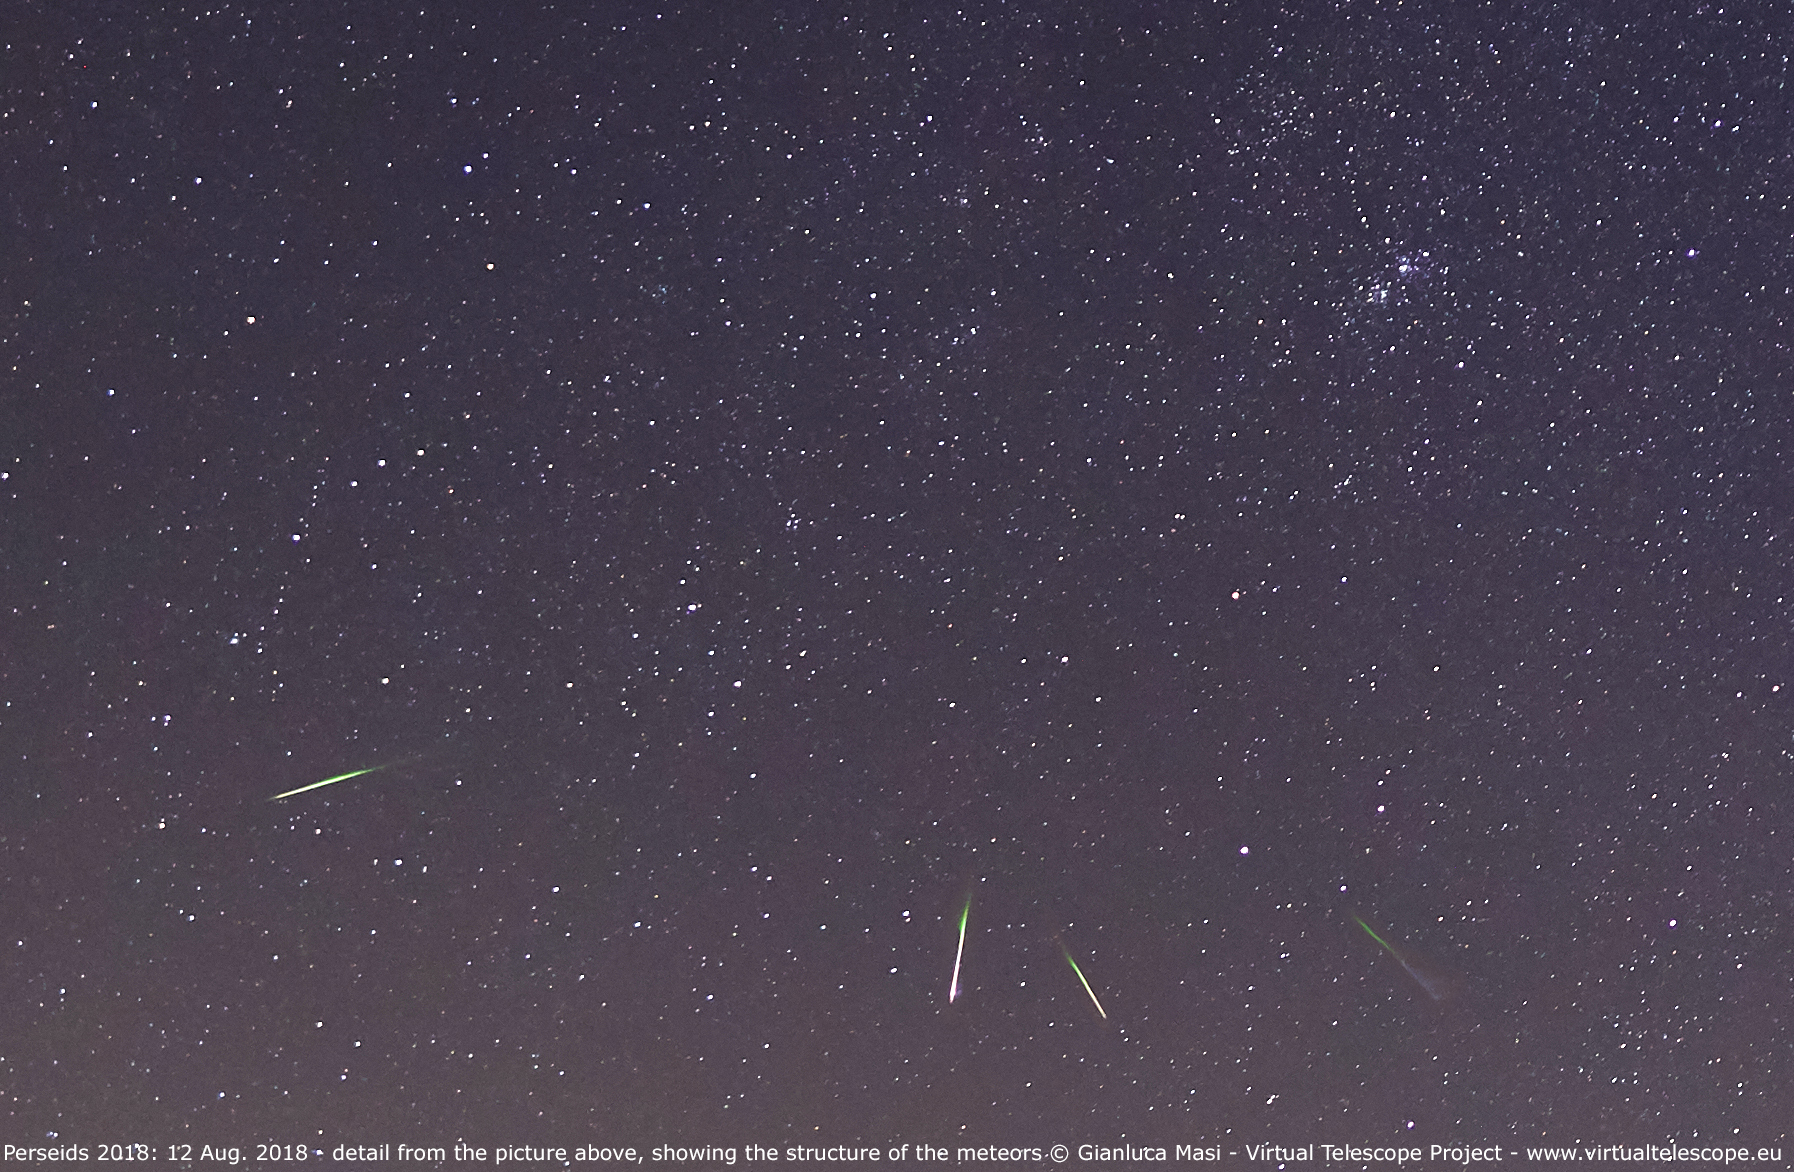 A close-up, showing the structure of the meteor streaks